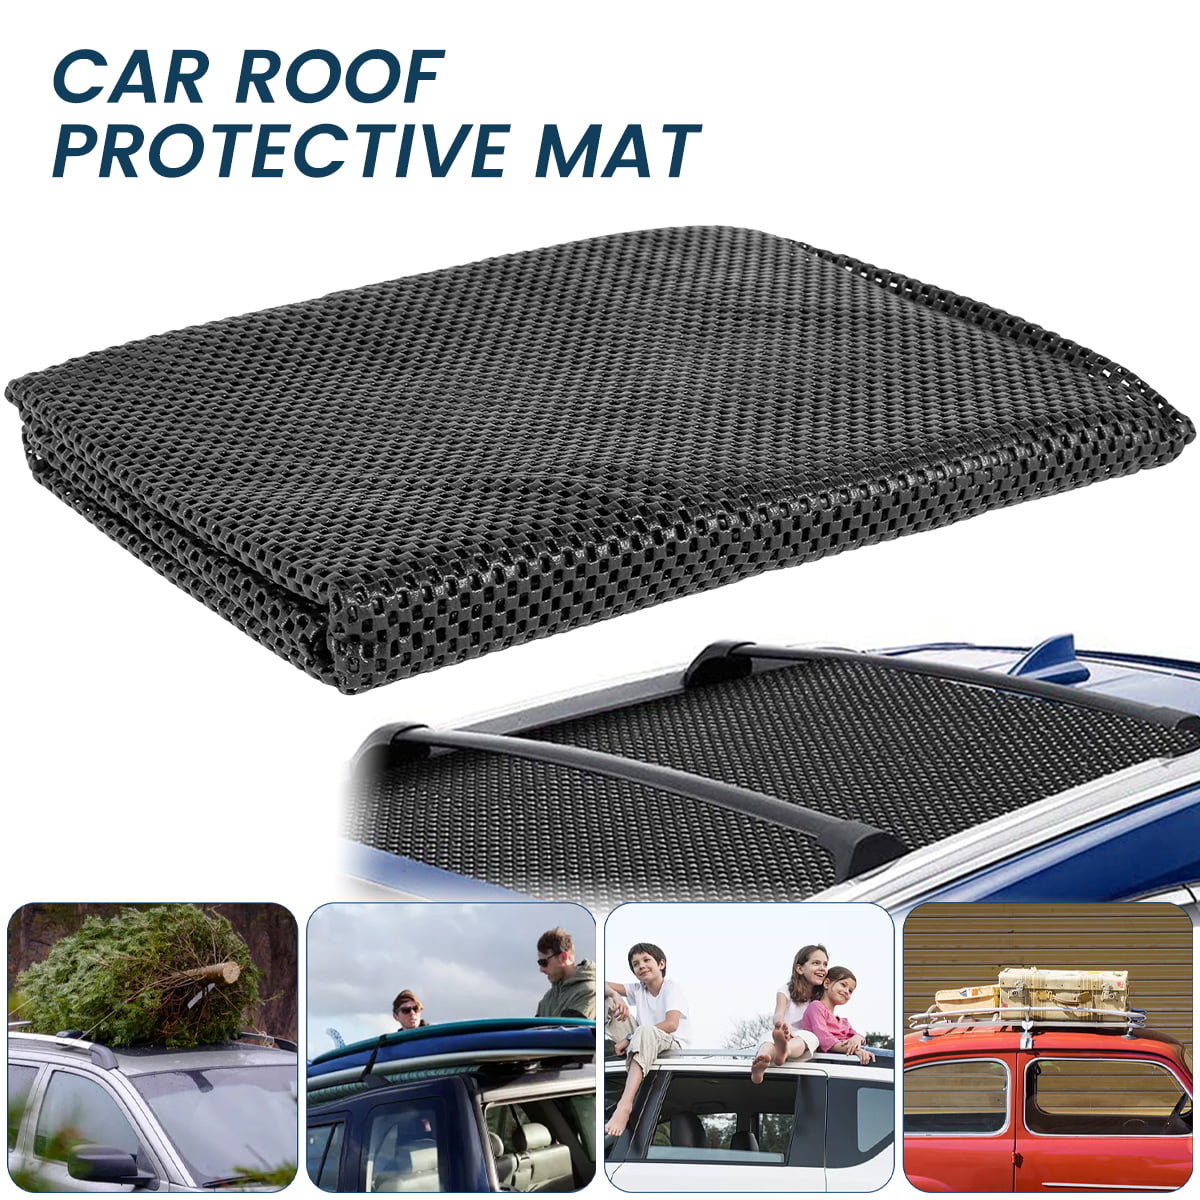 SUNLAND Car Roof Protective Mat Car Roof Rack Pad Under Any Rooftop Cargo Bag 